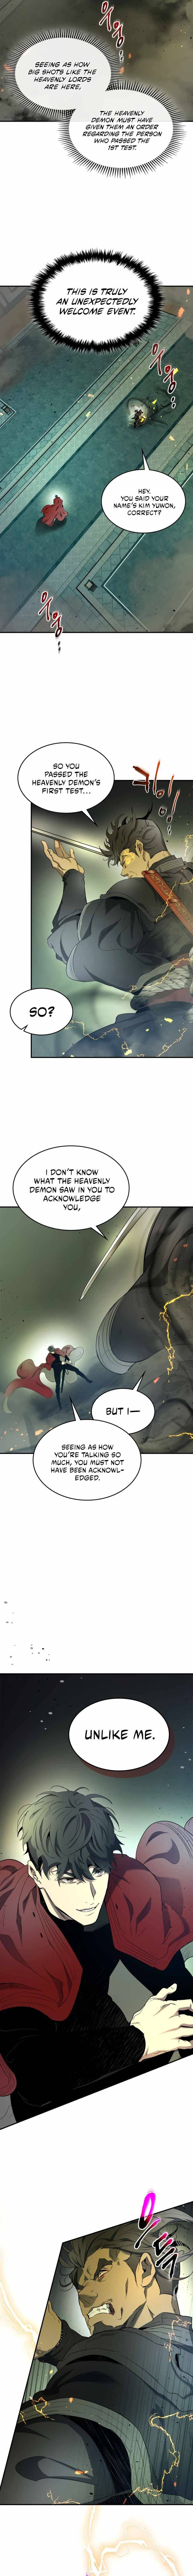 Leveling With The Gods Chapter 38 page 3